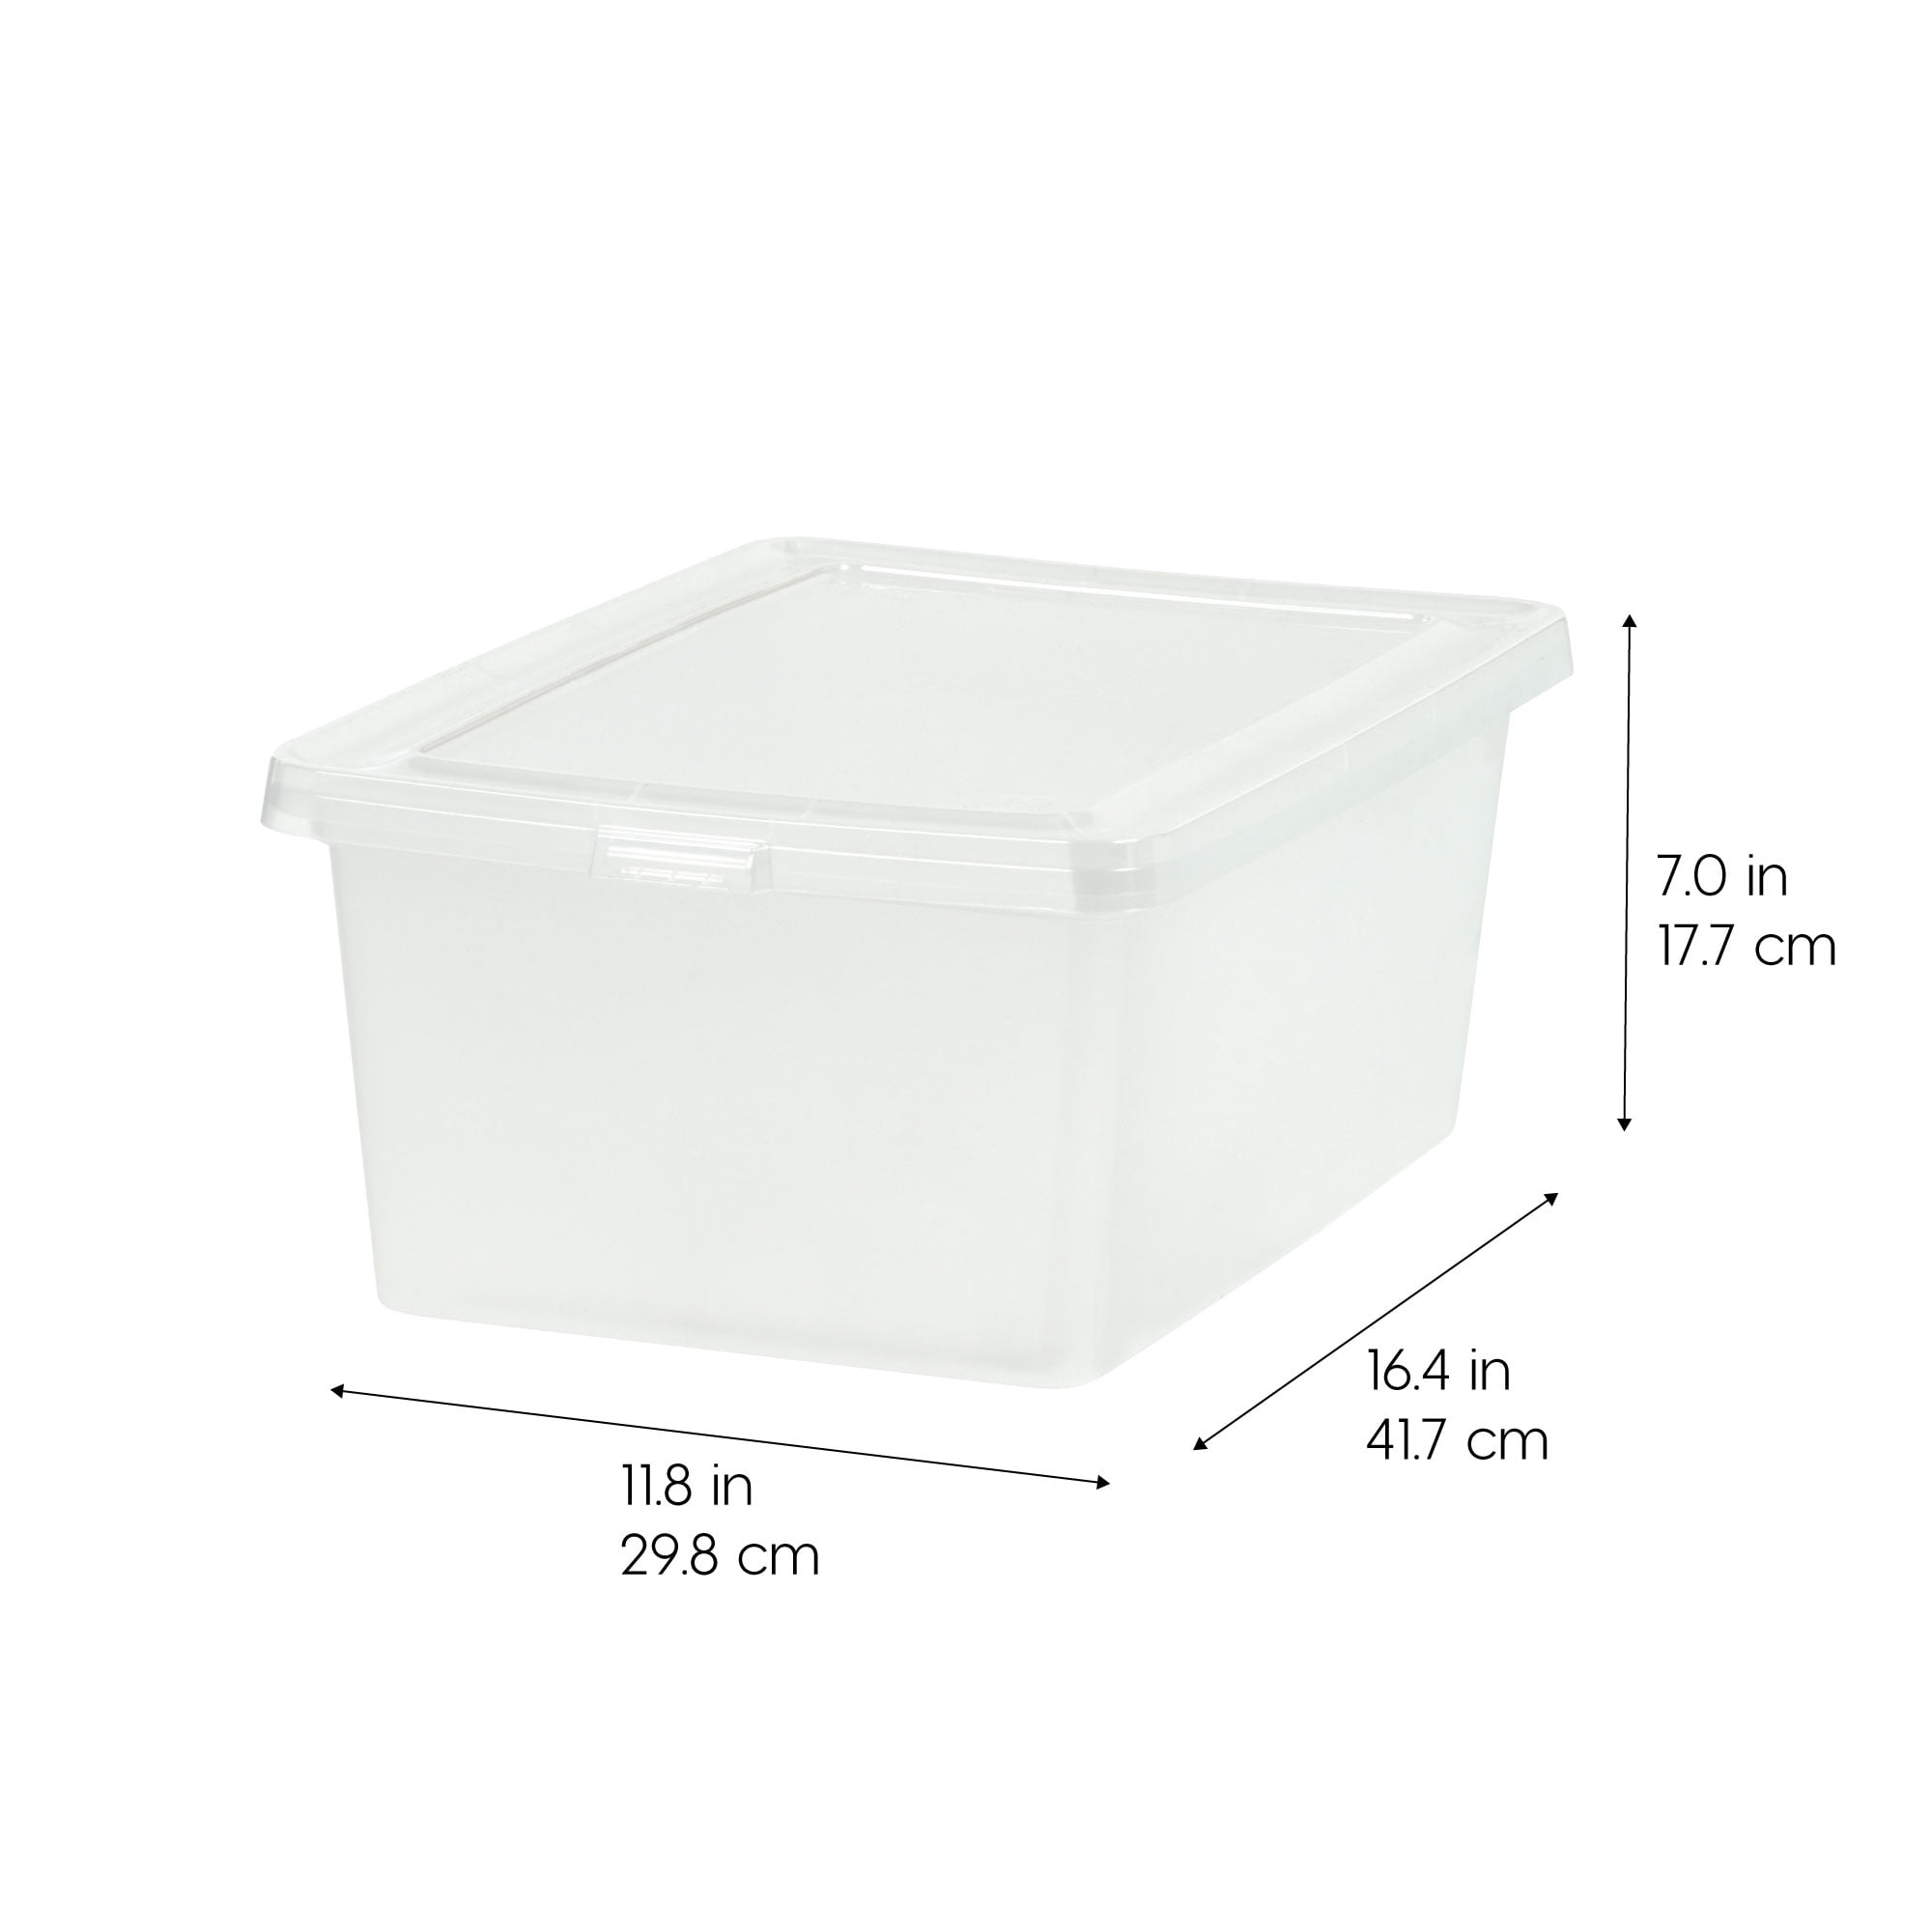 IRIS Medium 4.25-Gallons (17-Quart) Clear Tote with Standard Snap